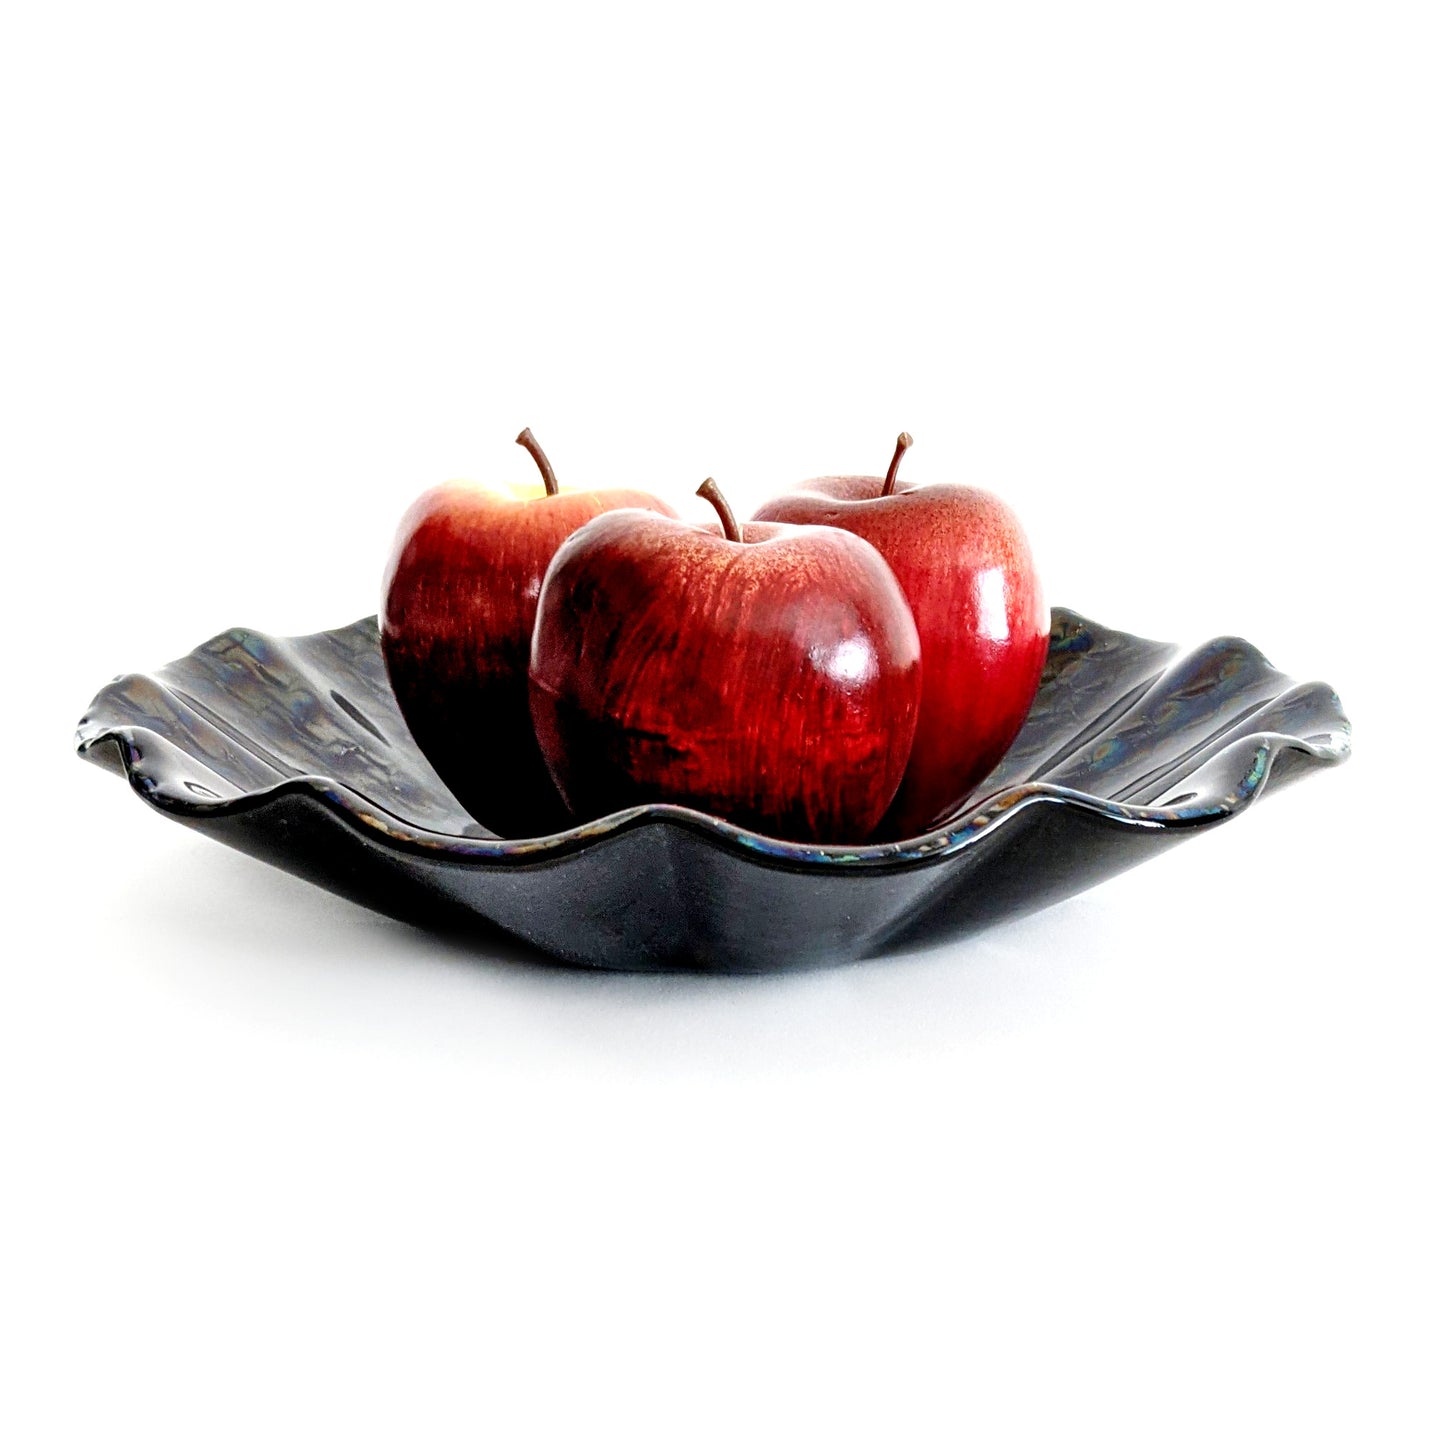 Black Glass Art Decorative Bowl with Fluted Edge